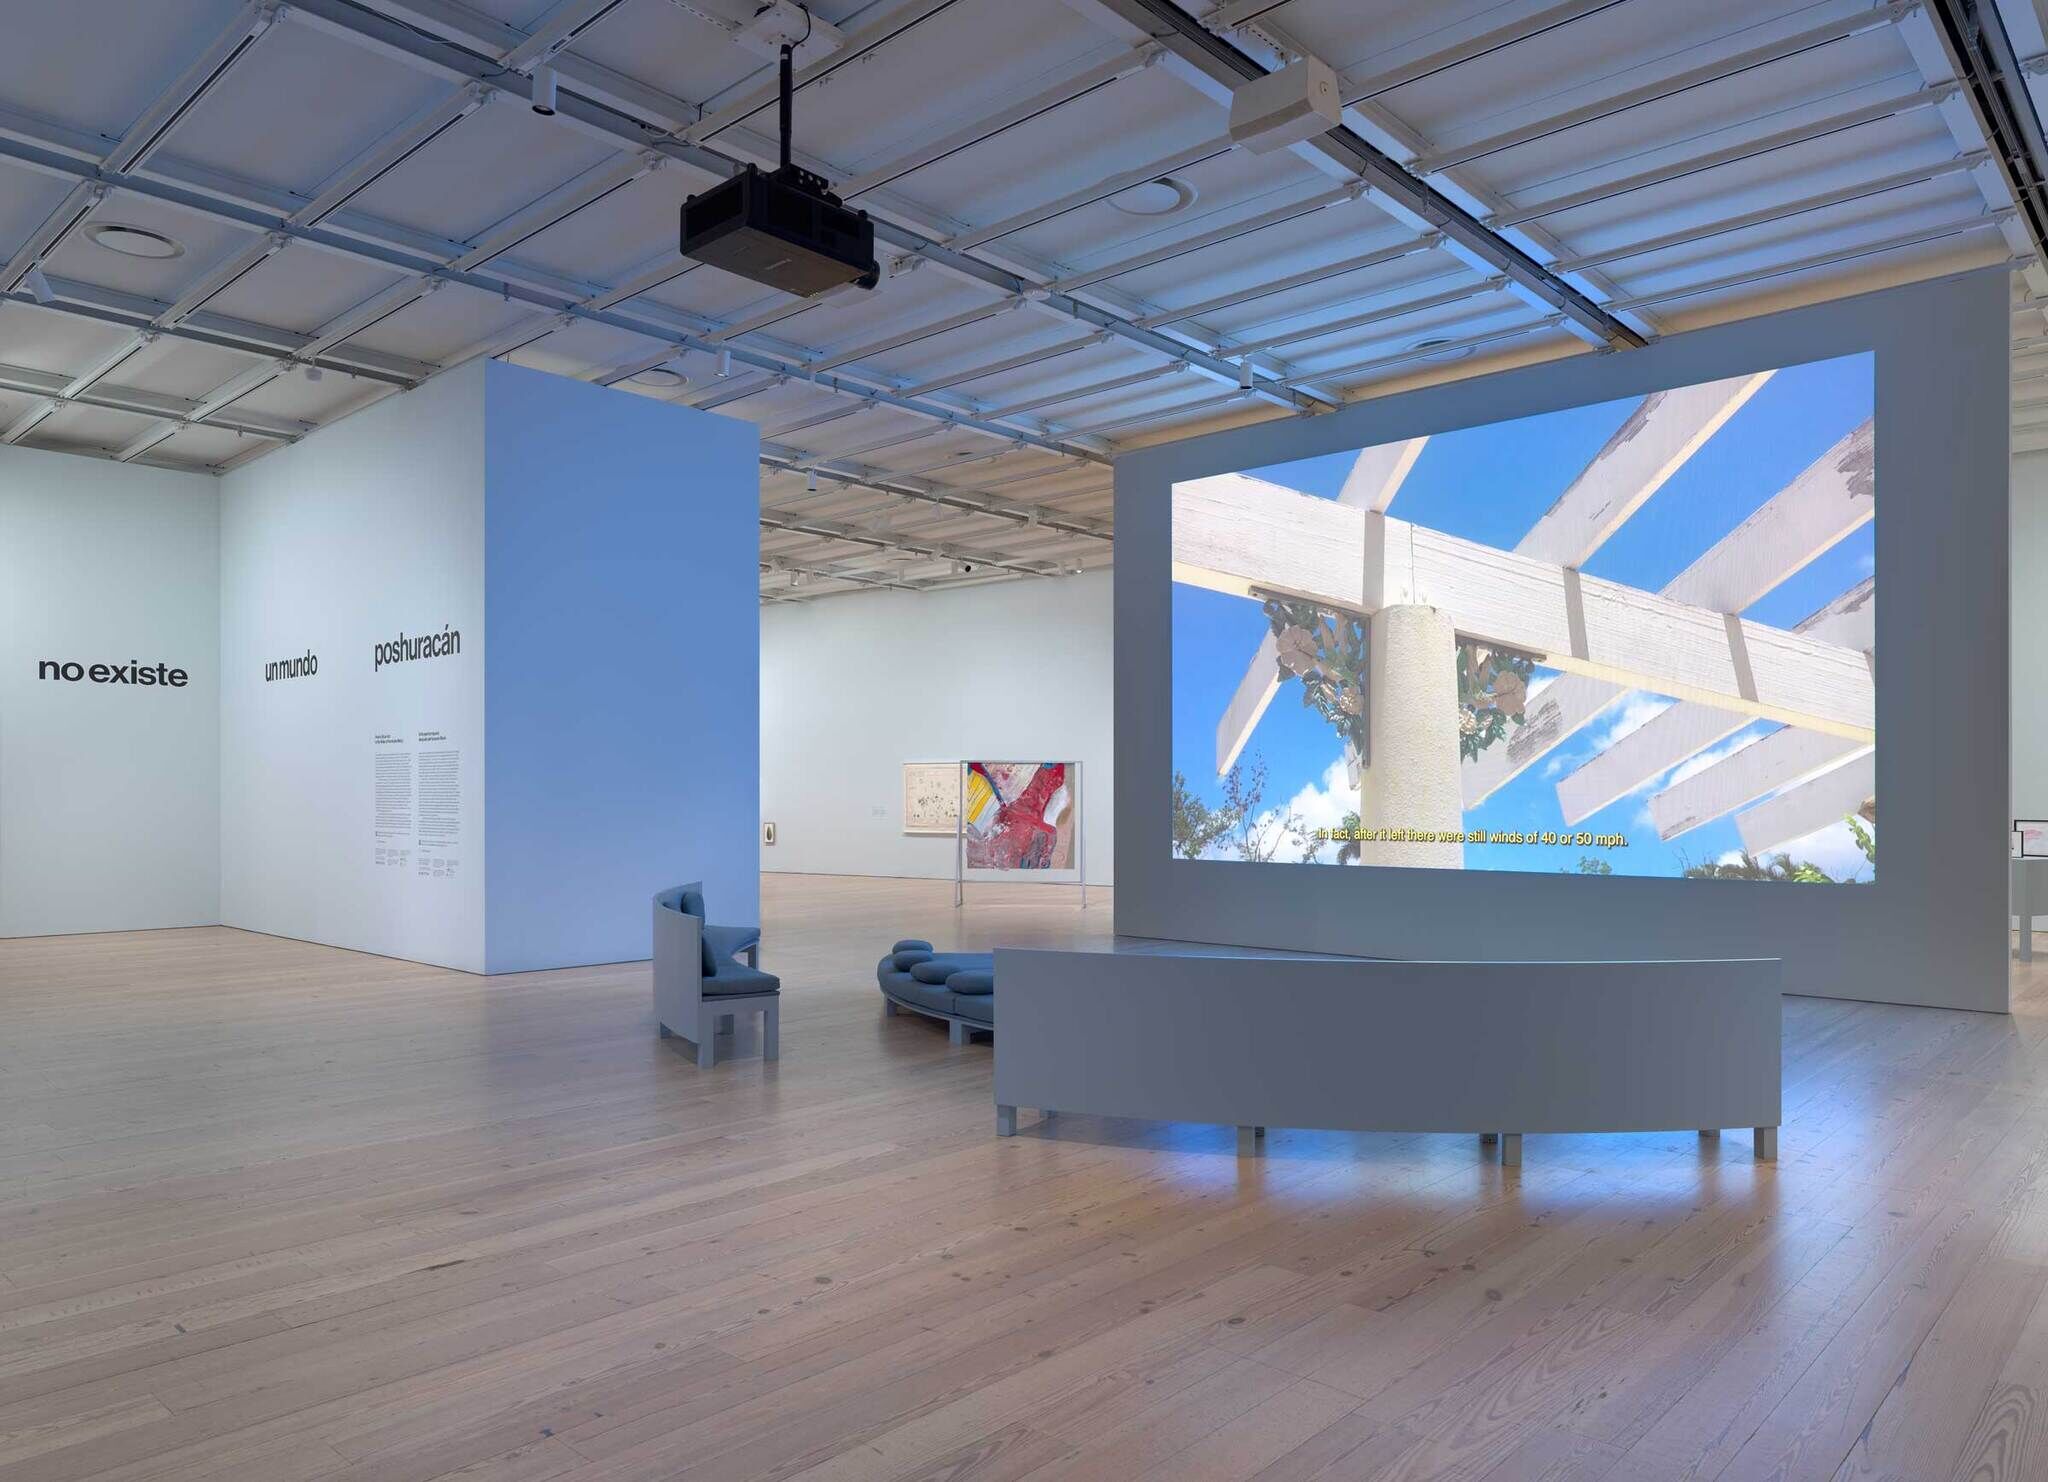 A big projection of an open roof with a blue sky in a room with three couches facing it.